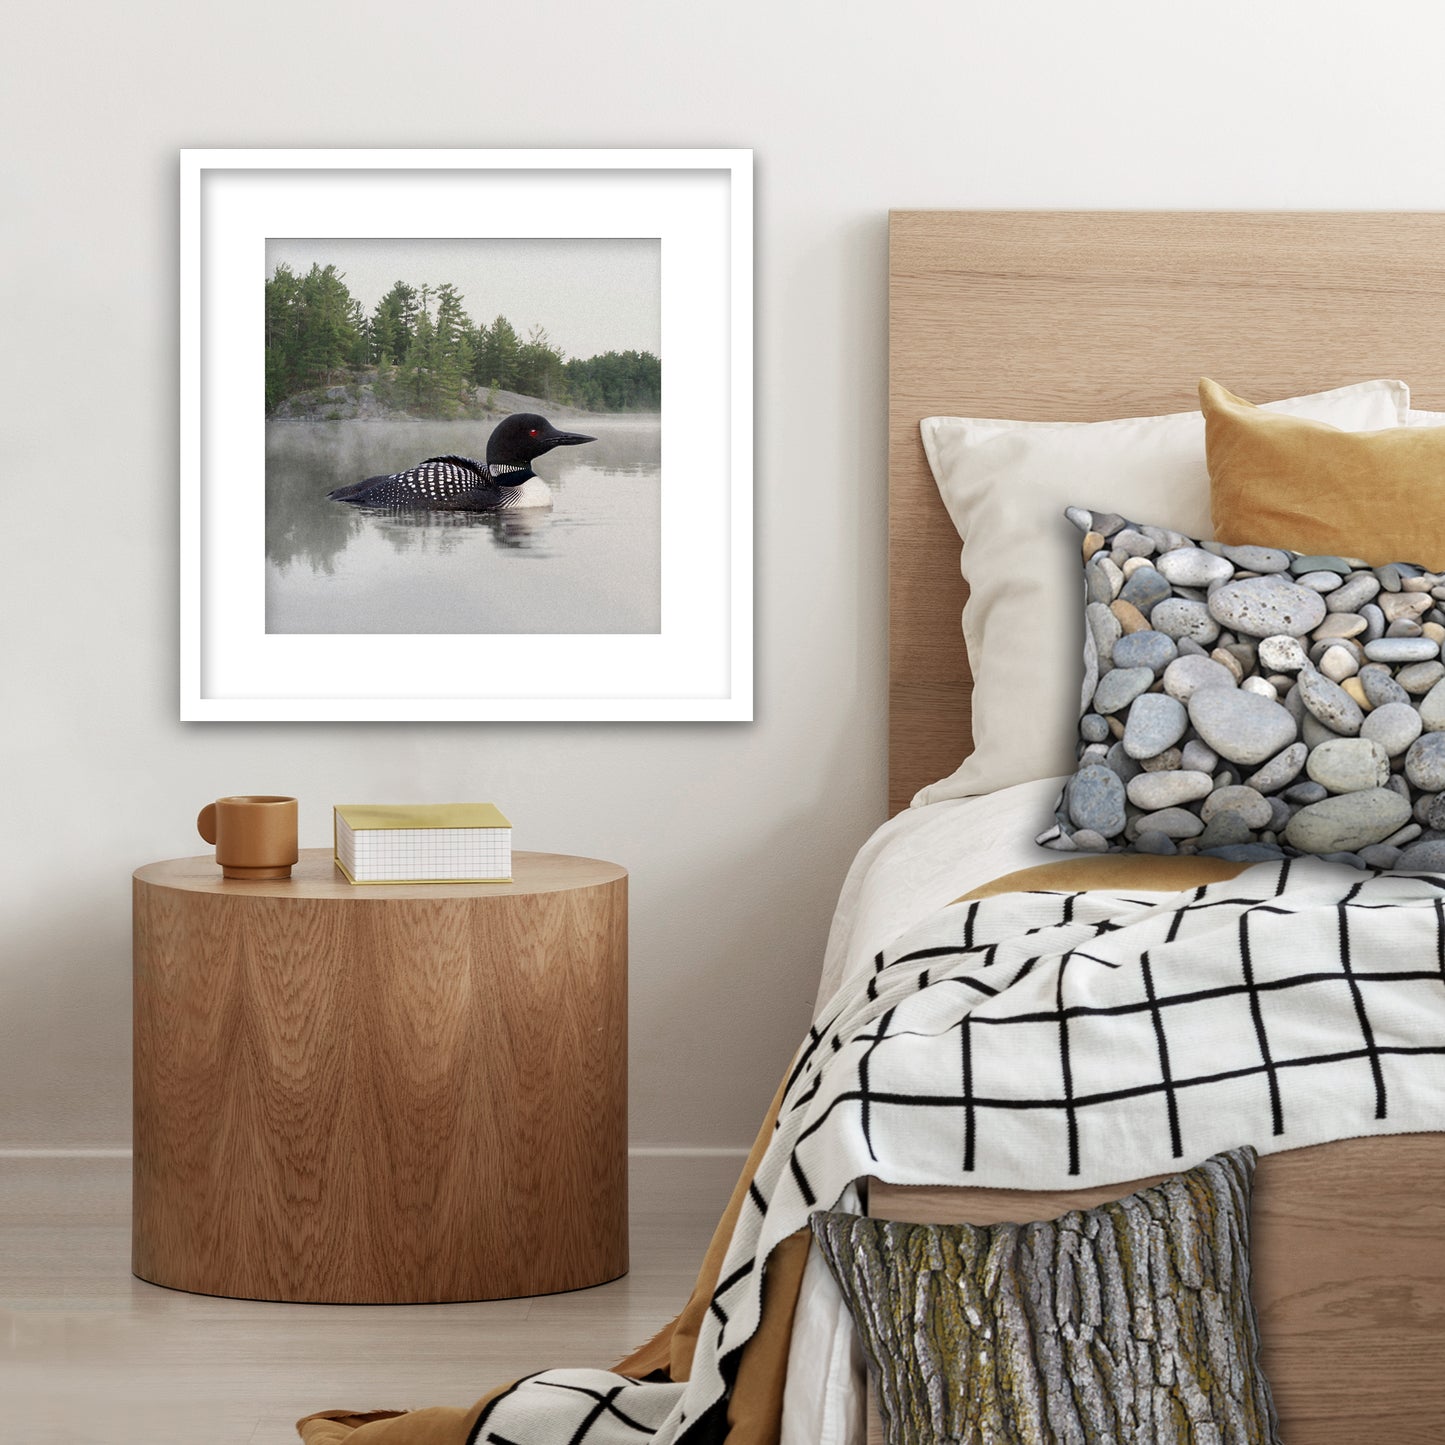 Loon on the Water Framed Fine Art Print